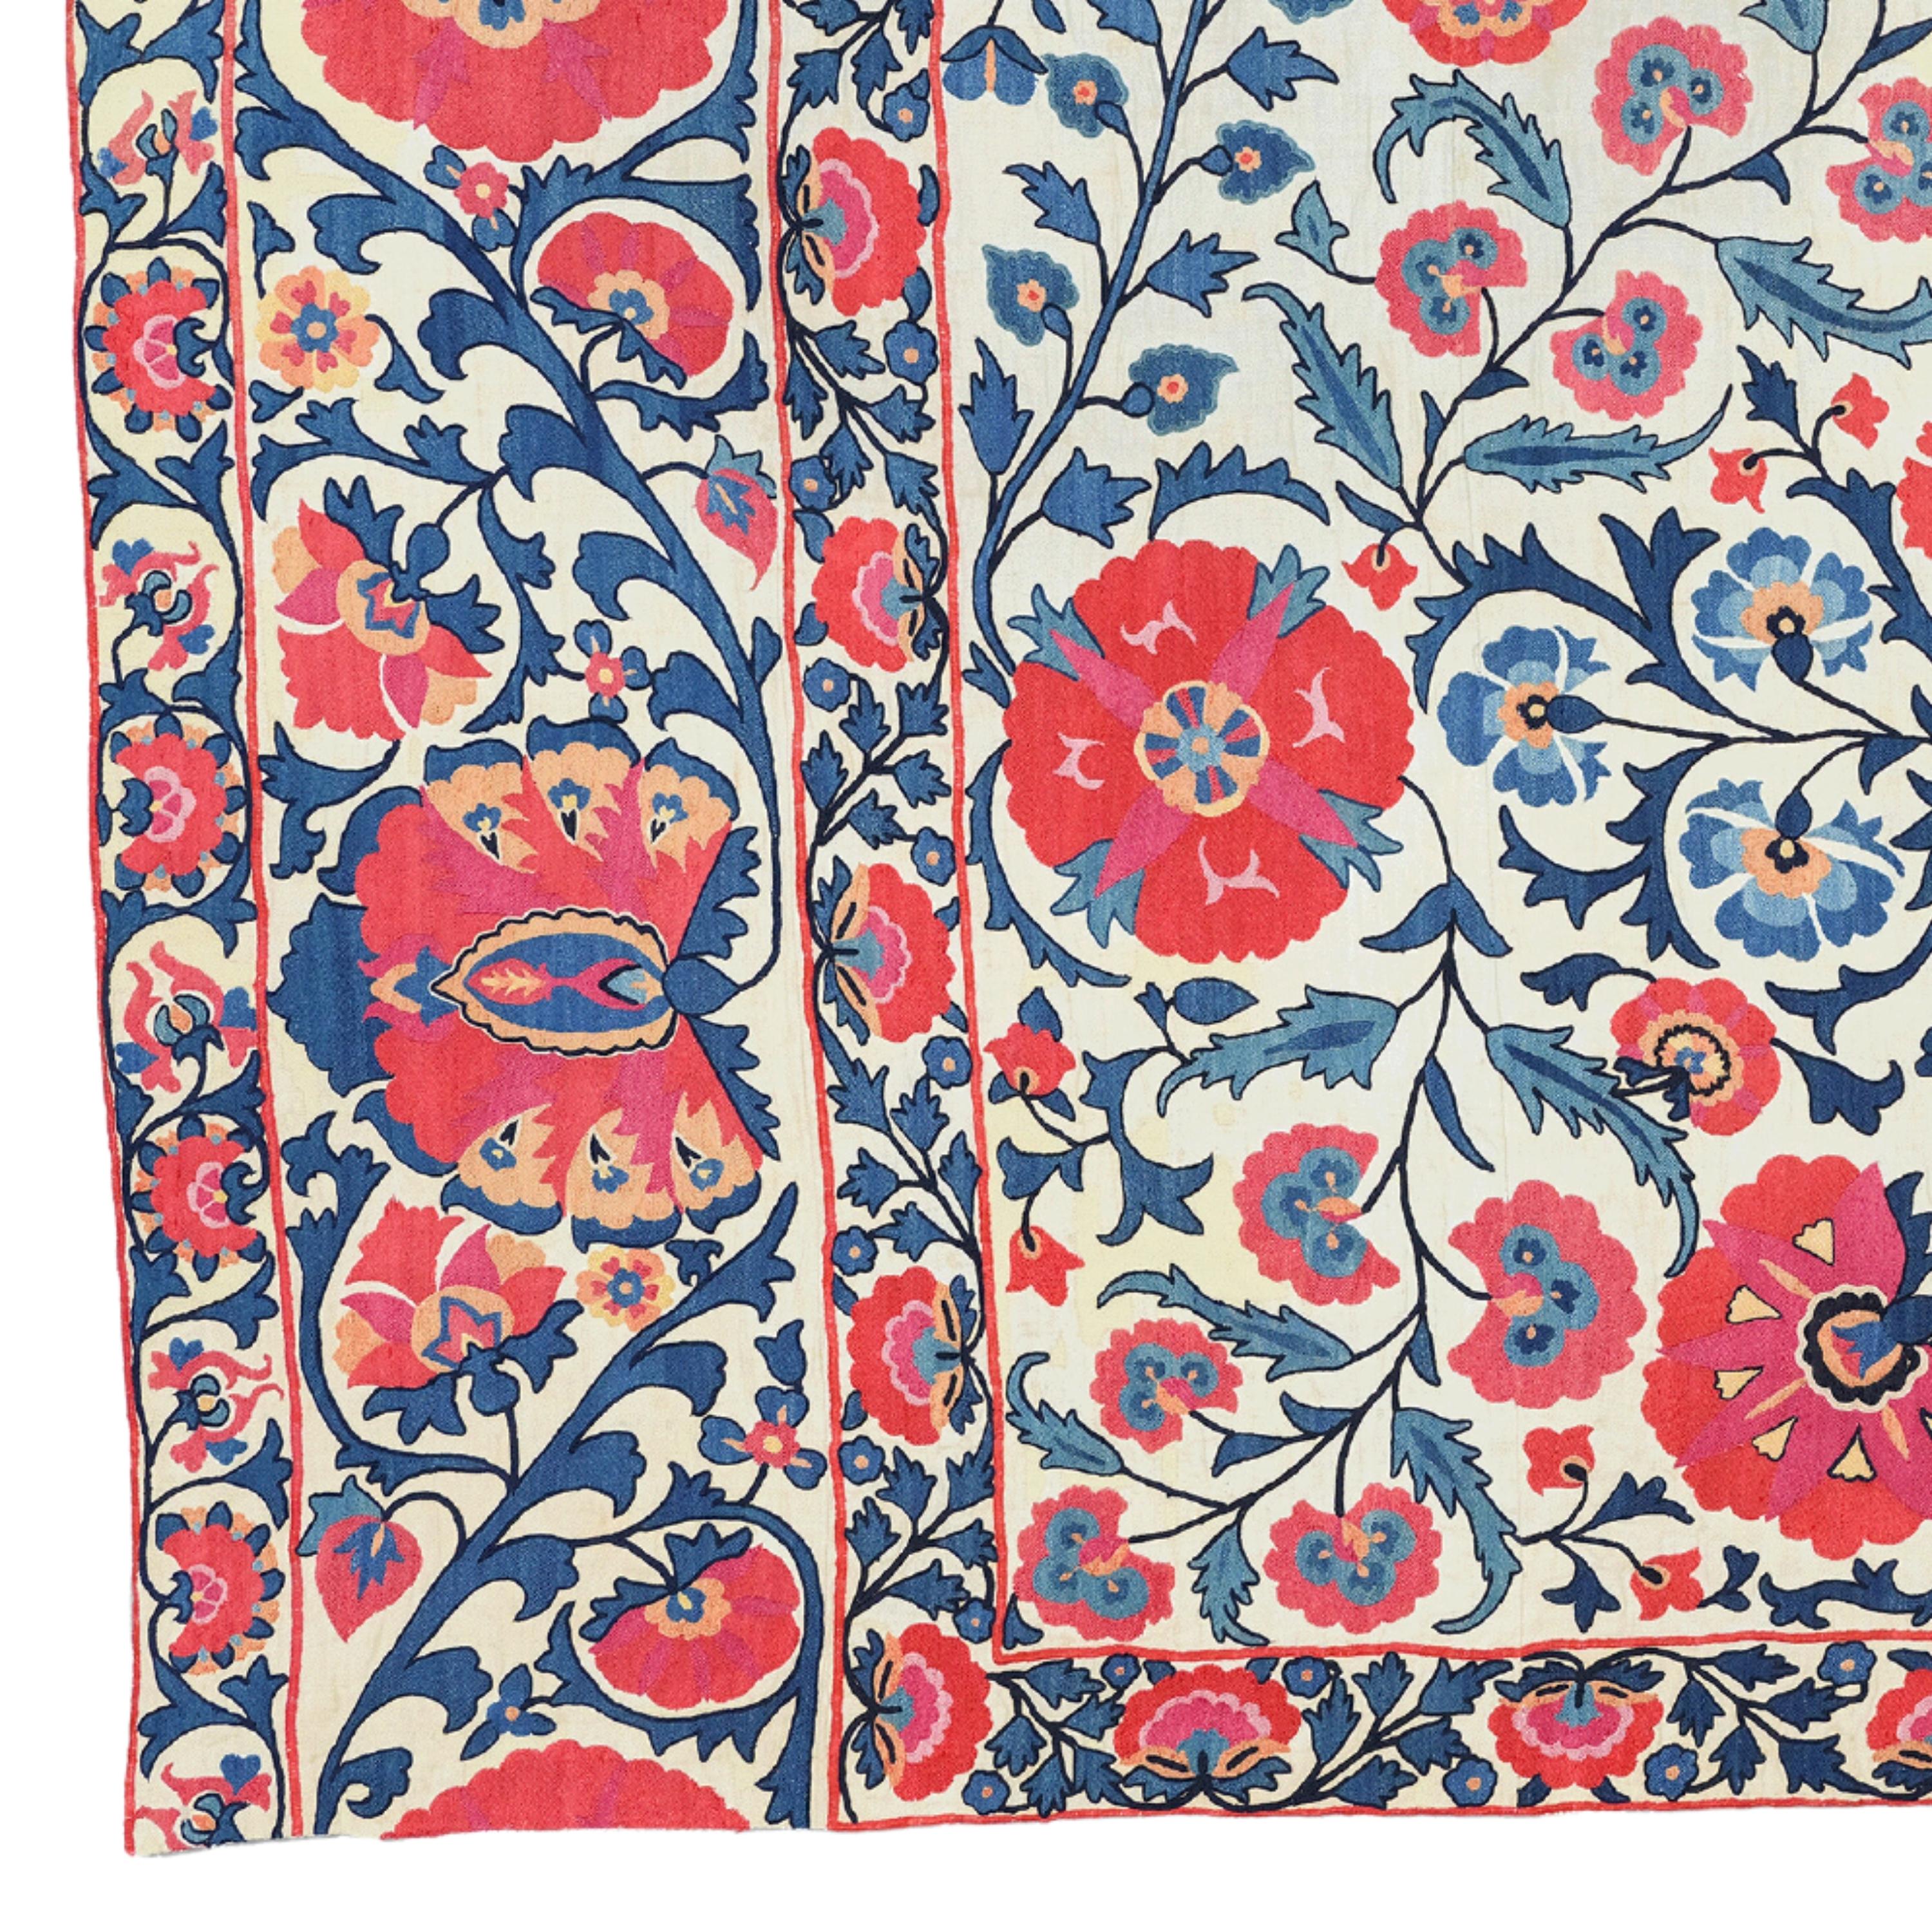 18th Century Shahrisyabz Suzani Fragment

A superb antique “Suzani” embroidery from Uzbekistan. This particular style with bold flowers and vines and generous proportions is attributed to the city of Shahrisabz. Pieces like this Suzani are